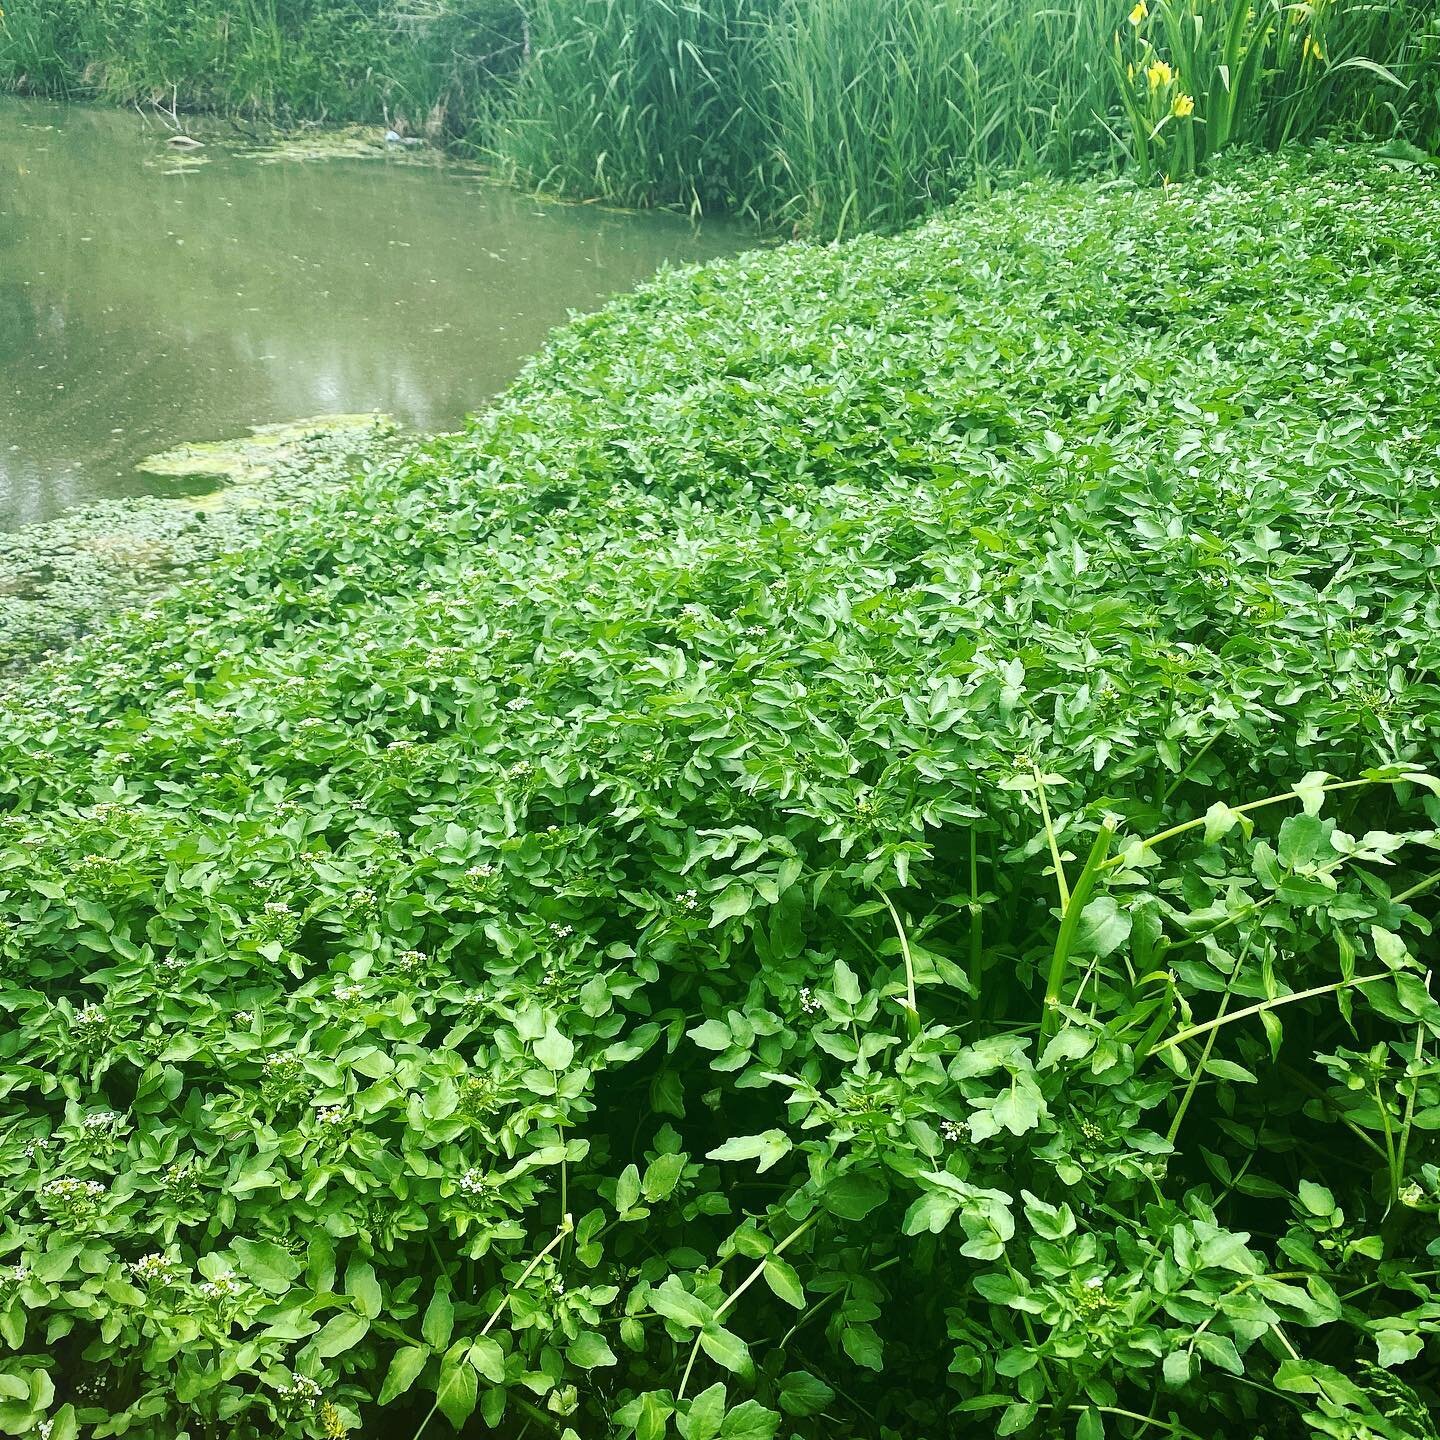 We ended up with a glut of watercress this year by the pond. Just picked a big batch as this lot is starting to flower. Look for a healthy dish on @refreshwithhaley sometime soon

#growyourownfood #eatyourgreens #foraging